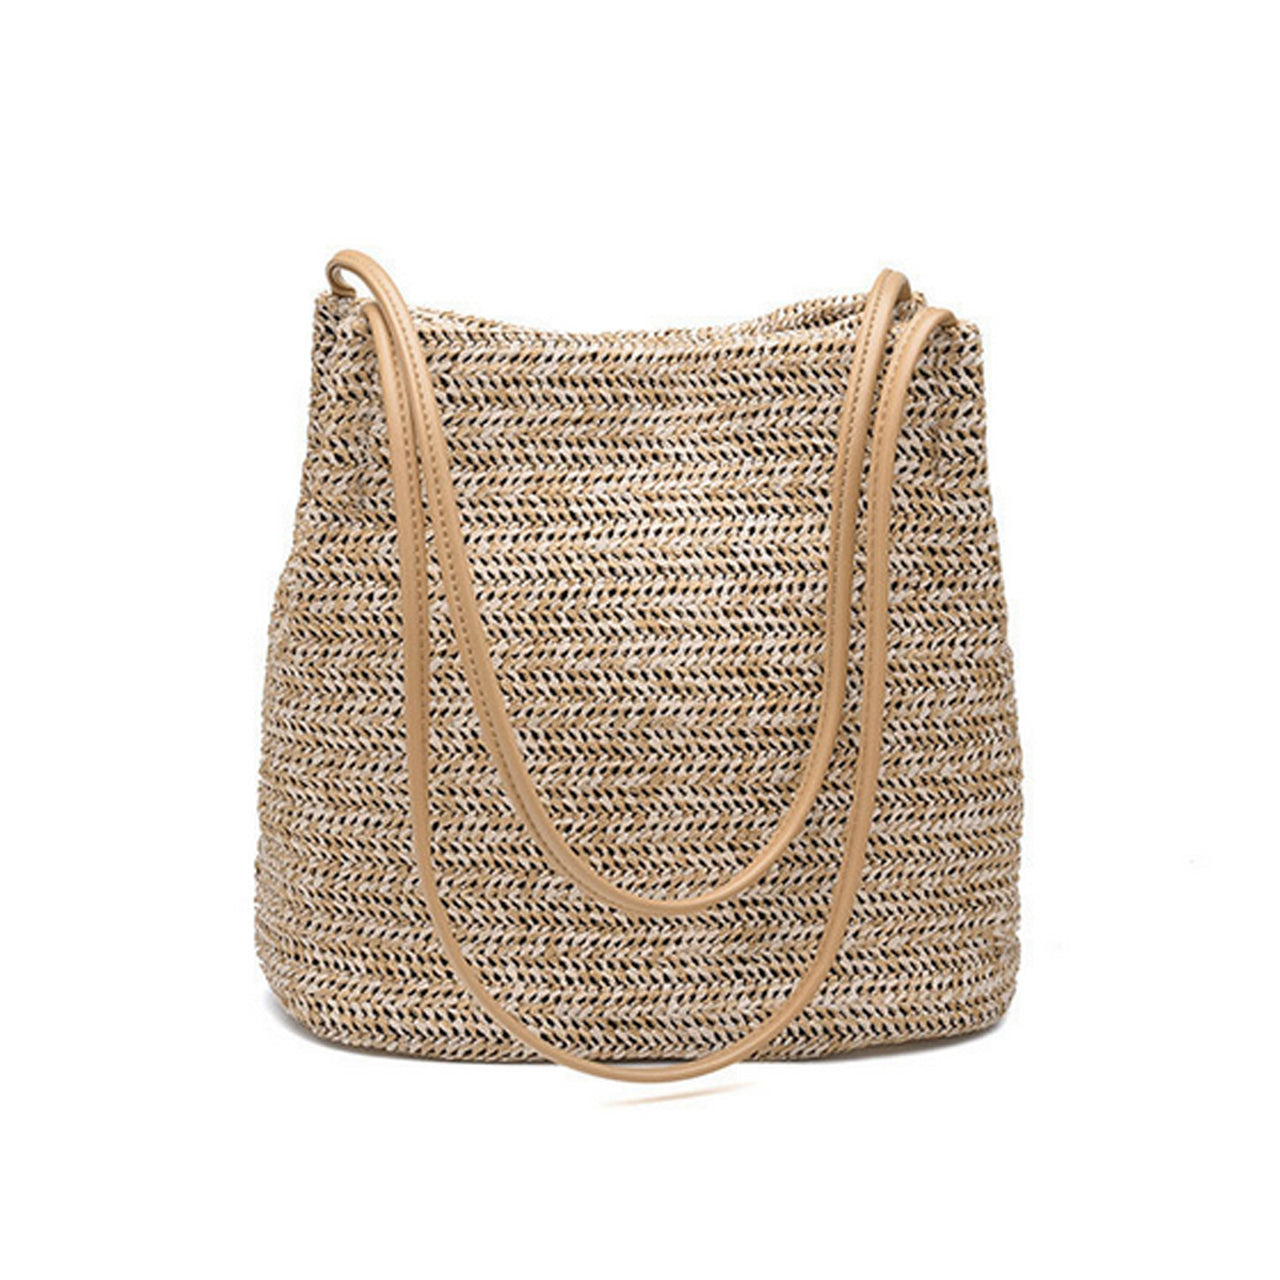 Trimmed Vegan Leather Strap Straw Tote